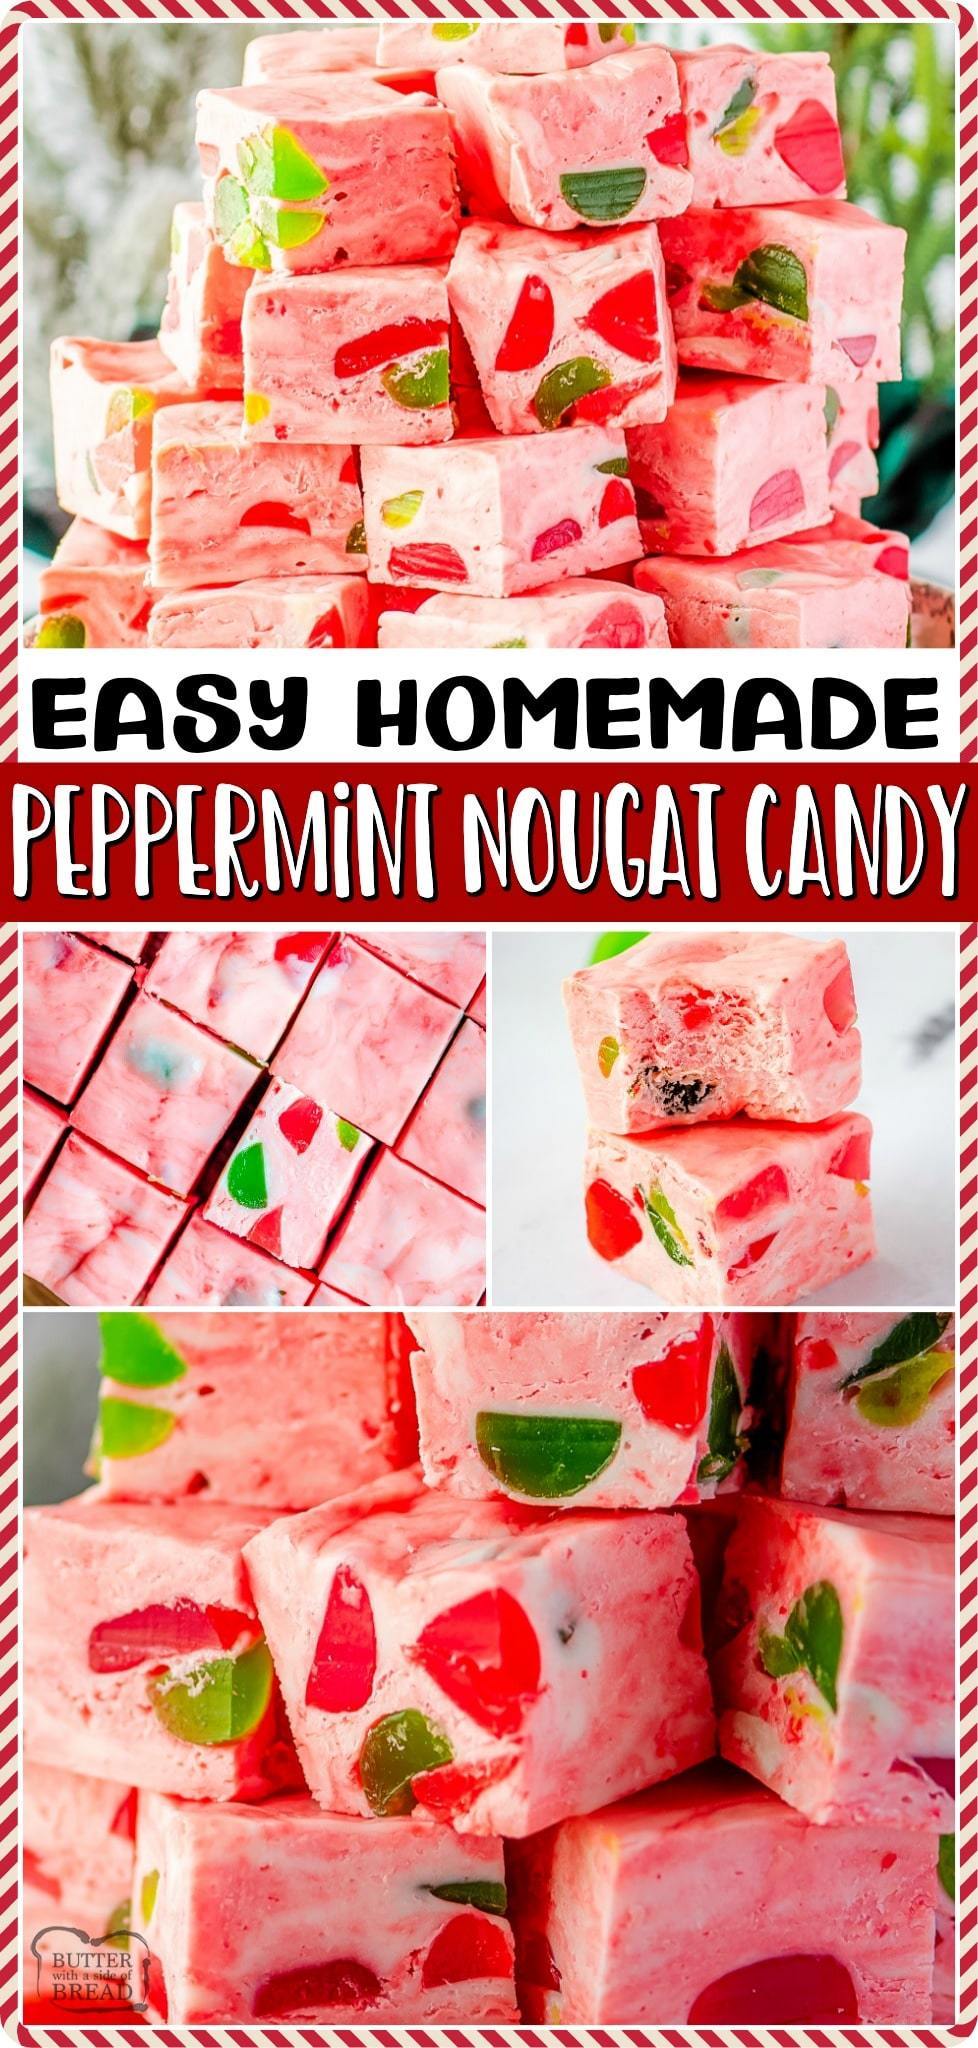 Homemade Peppermint Nougat Candy, made with 6 ingredients & is a perfectly festive holiday treat! This soft chewy candy with peppermint pieces & gumdrops is great for Christmas dessert trays! 